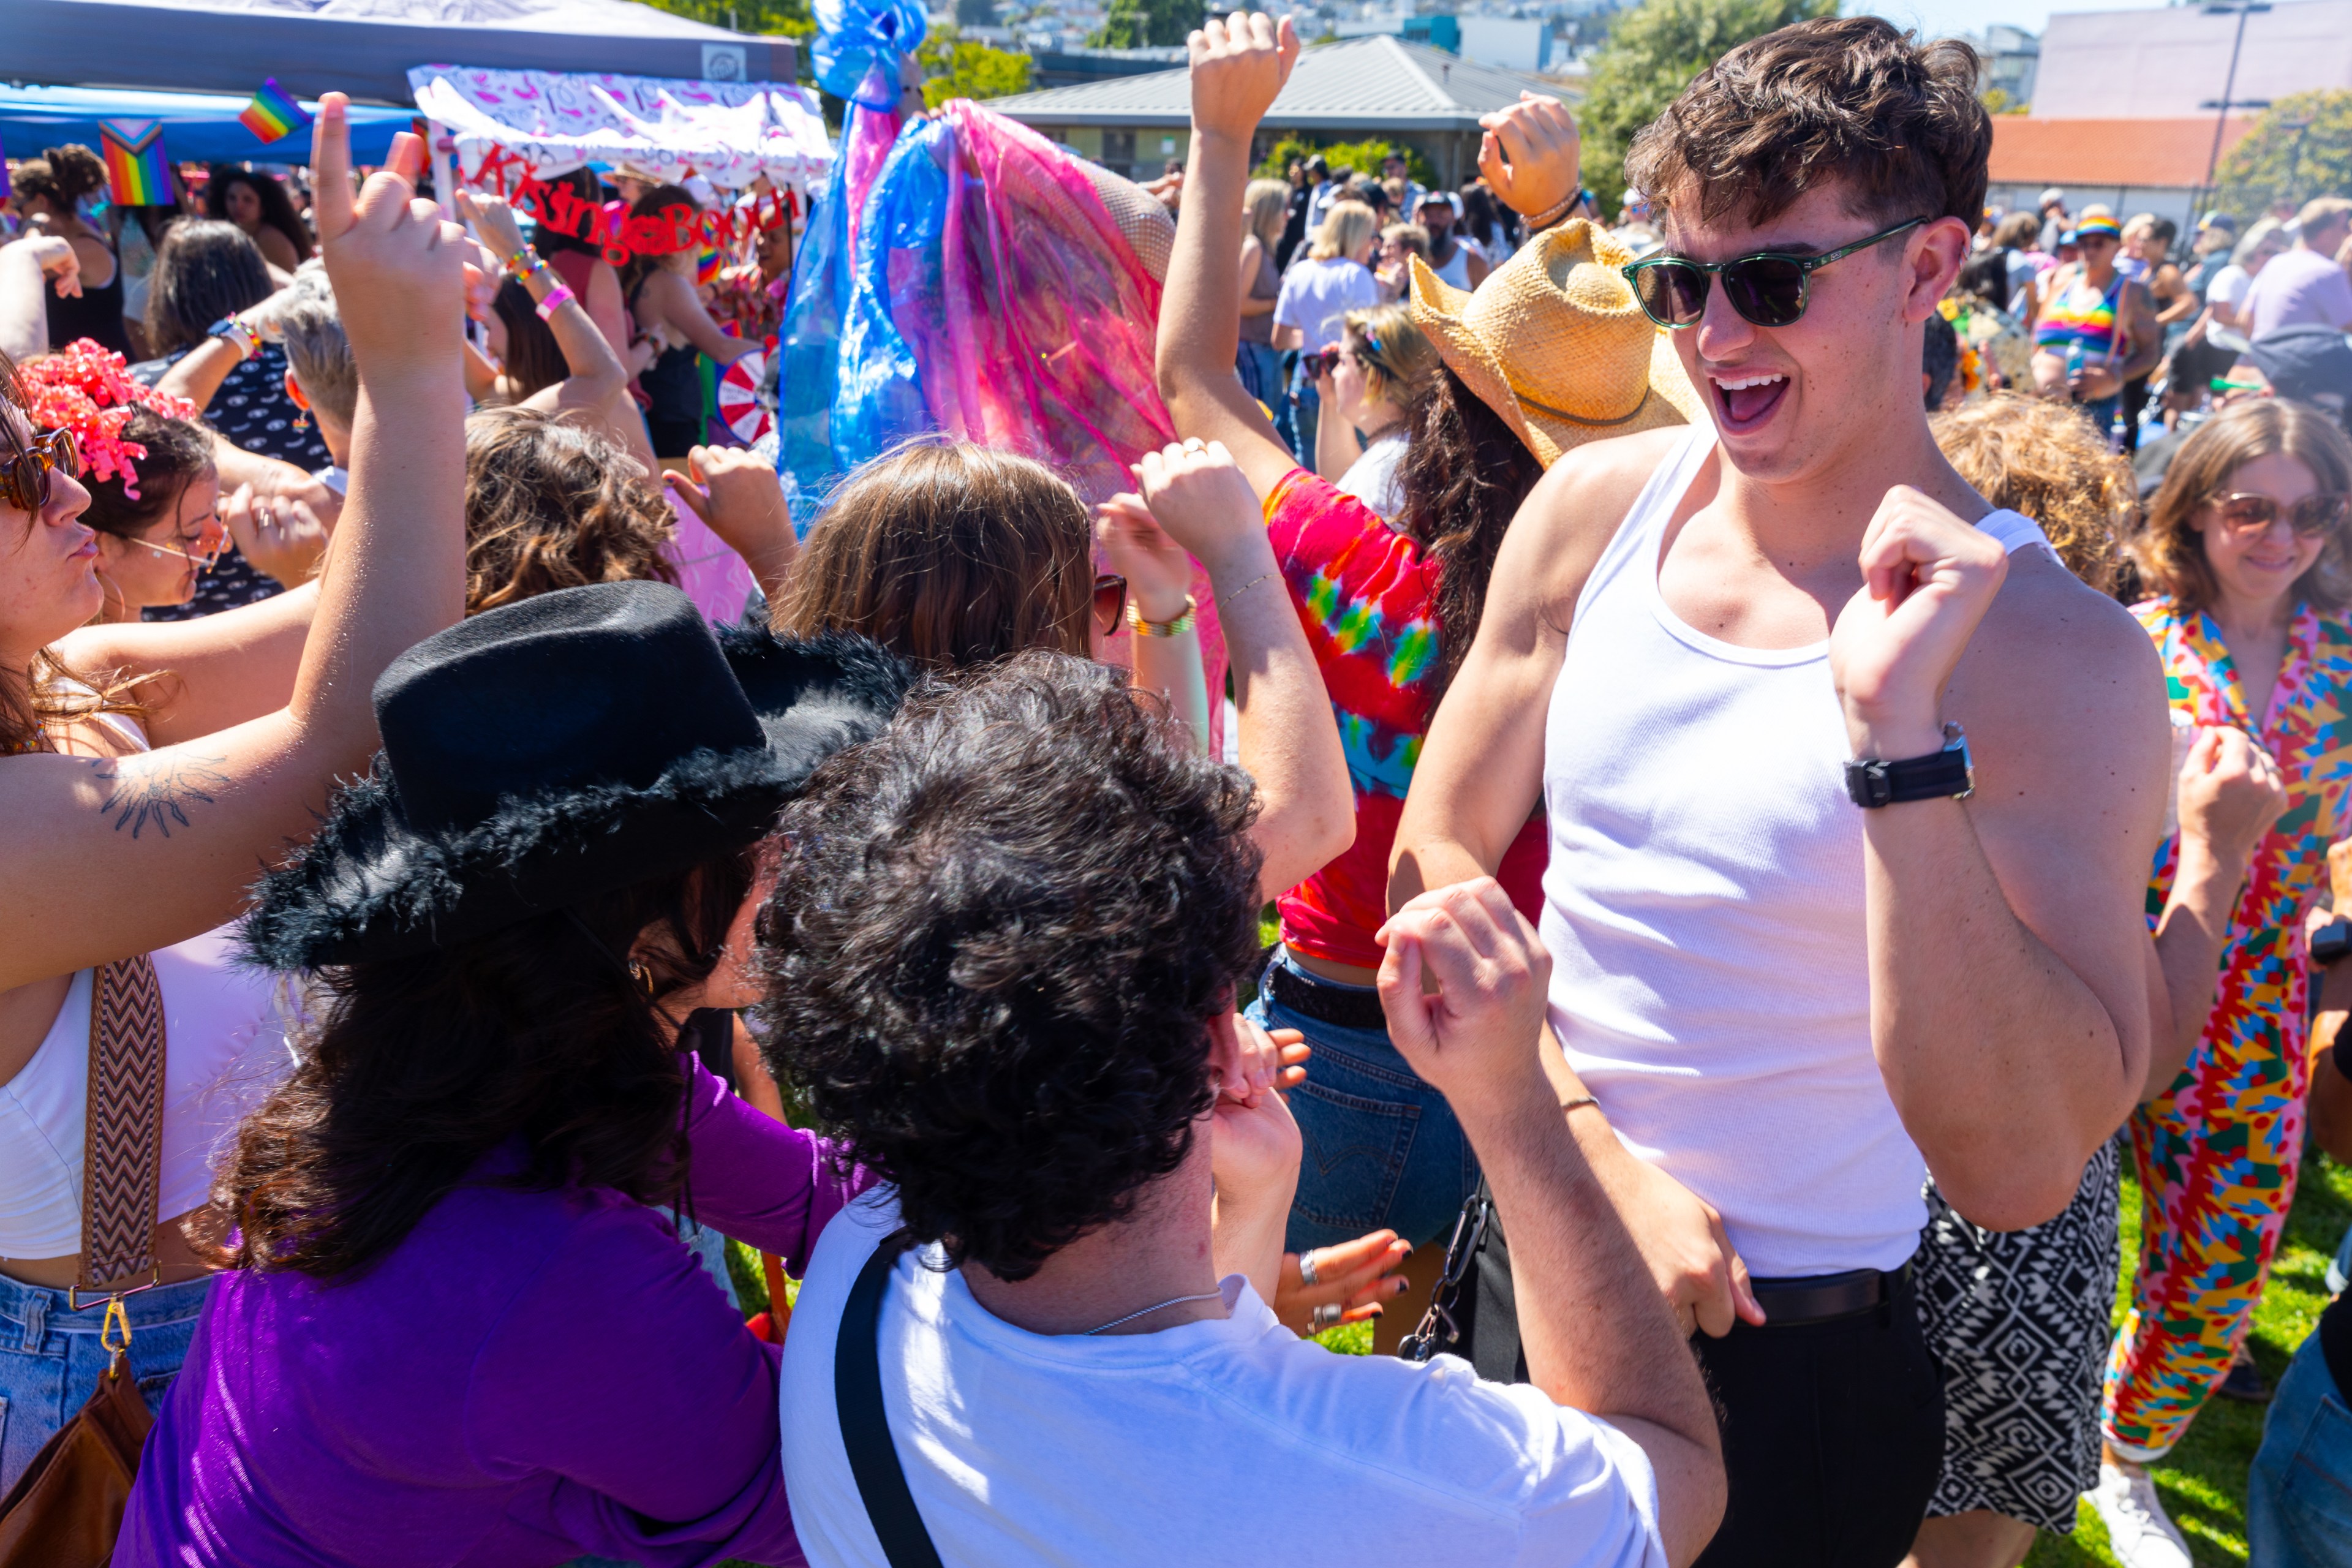 A group of people are joyfully dancing outdoors, wearing colorful outfits and sunglasses, amidst a crowd on a sunny day, creating a lively and festive atmosphere.